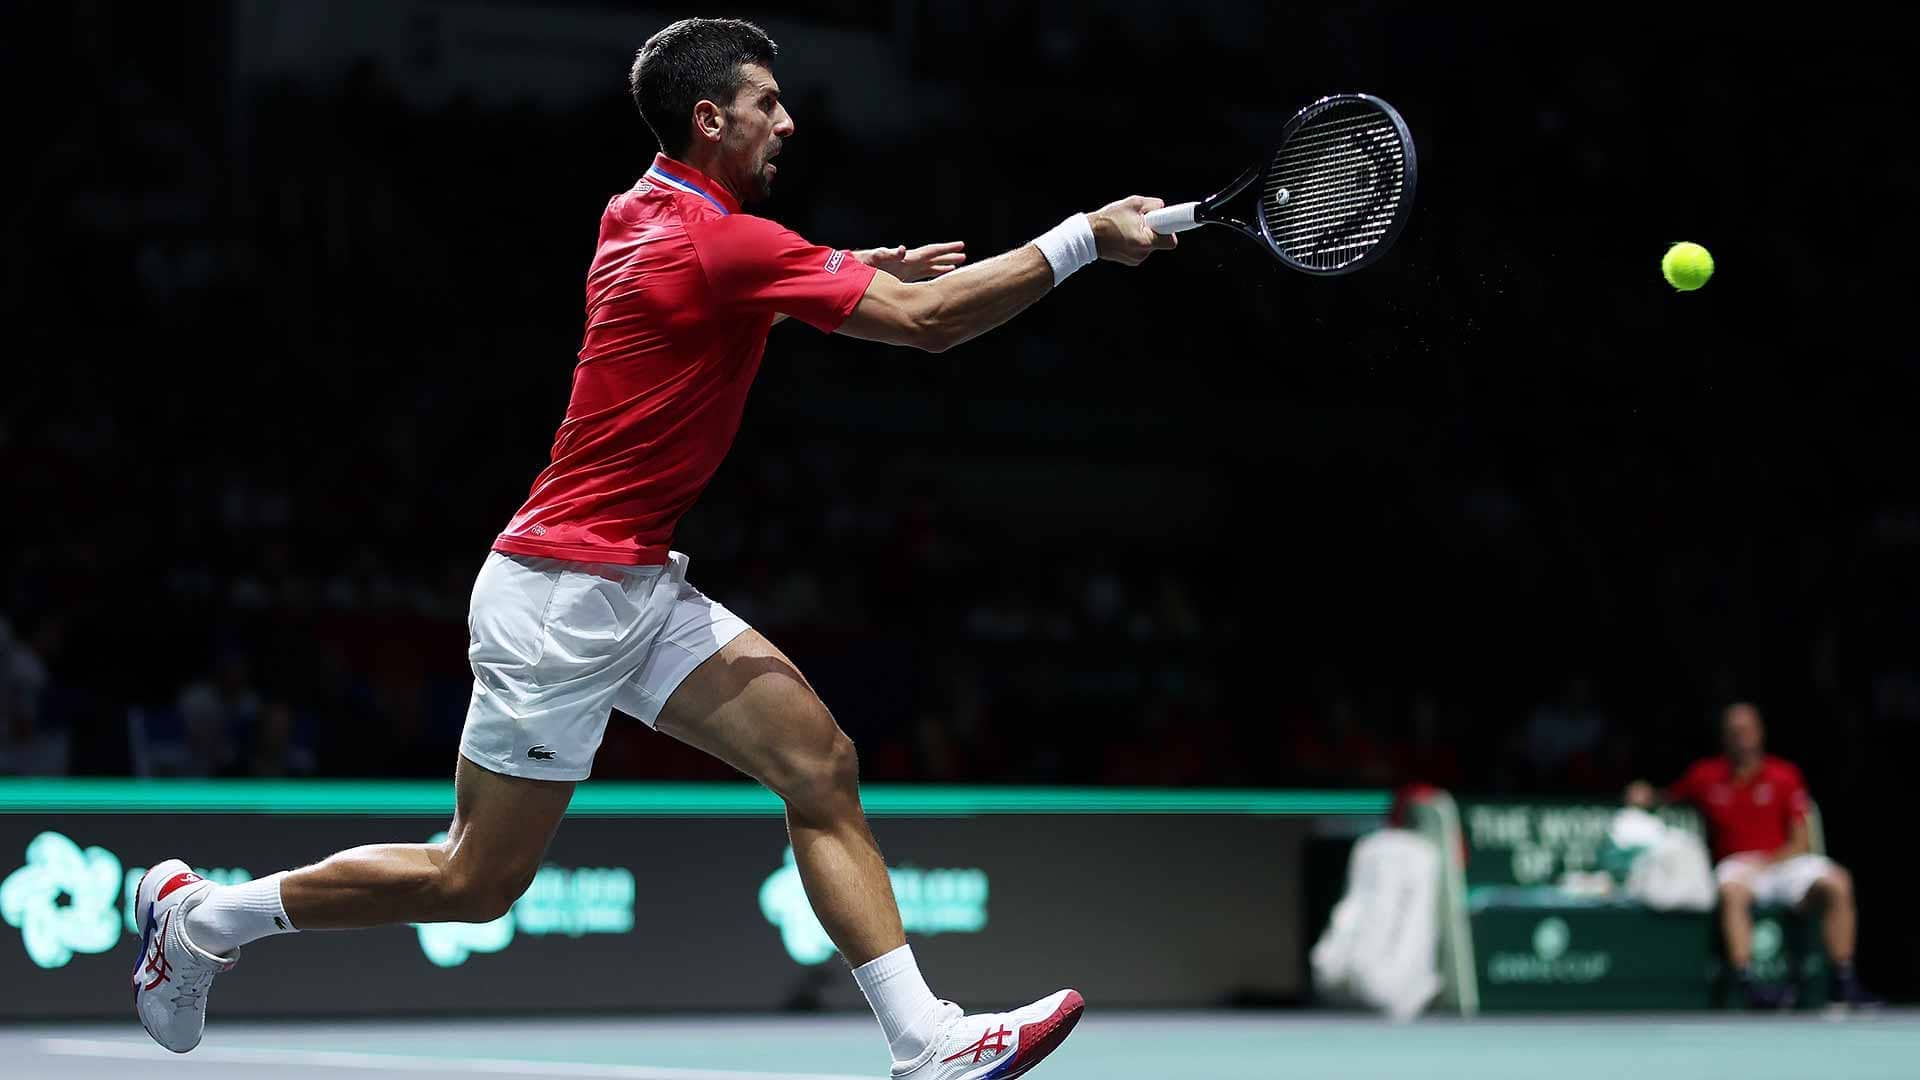 Novak Djokovic looks to finish his season on a high with a Davis Cup title with Serbia.